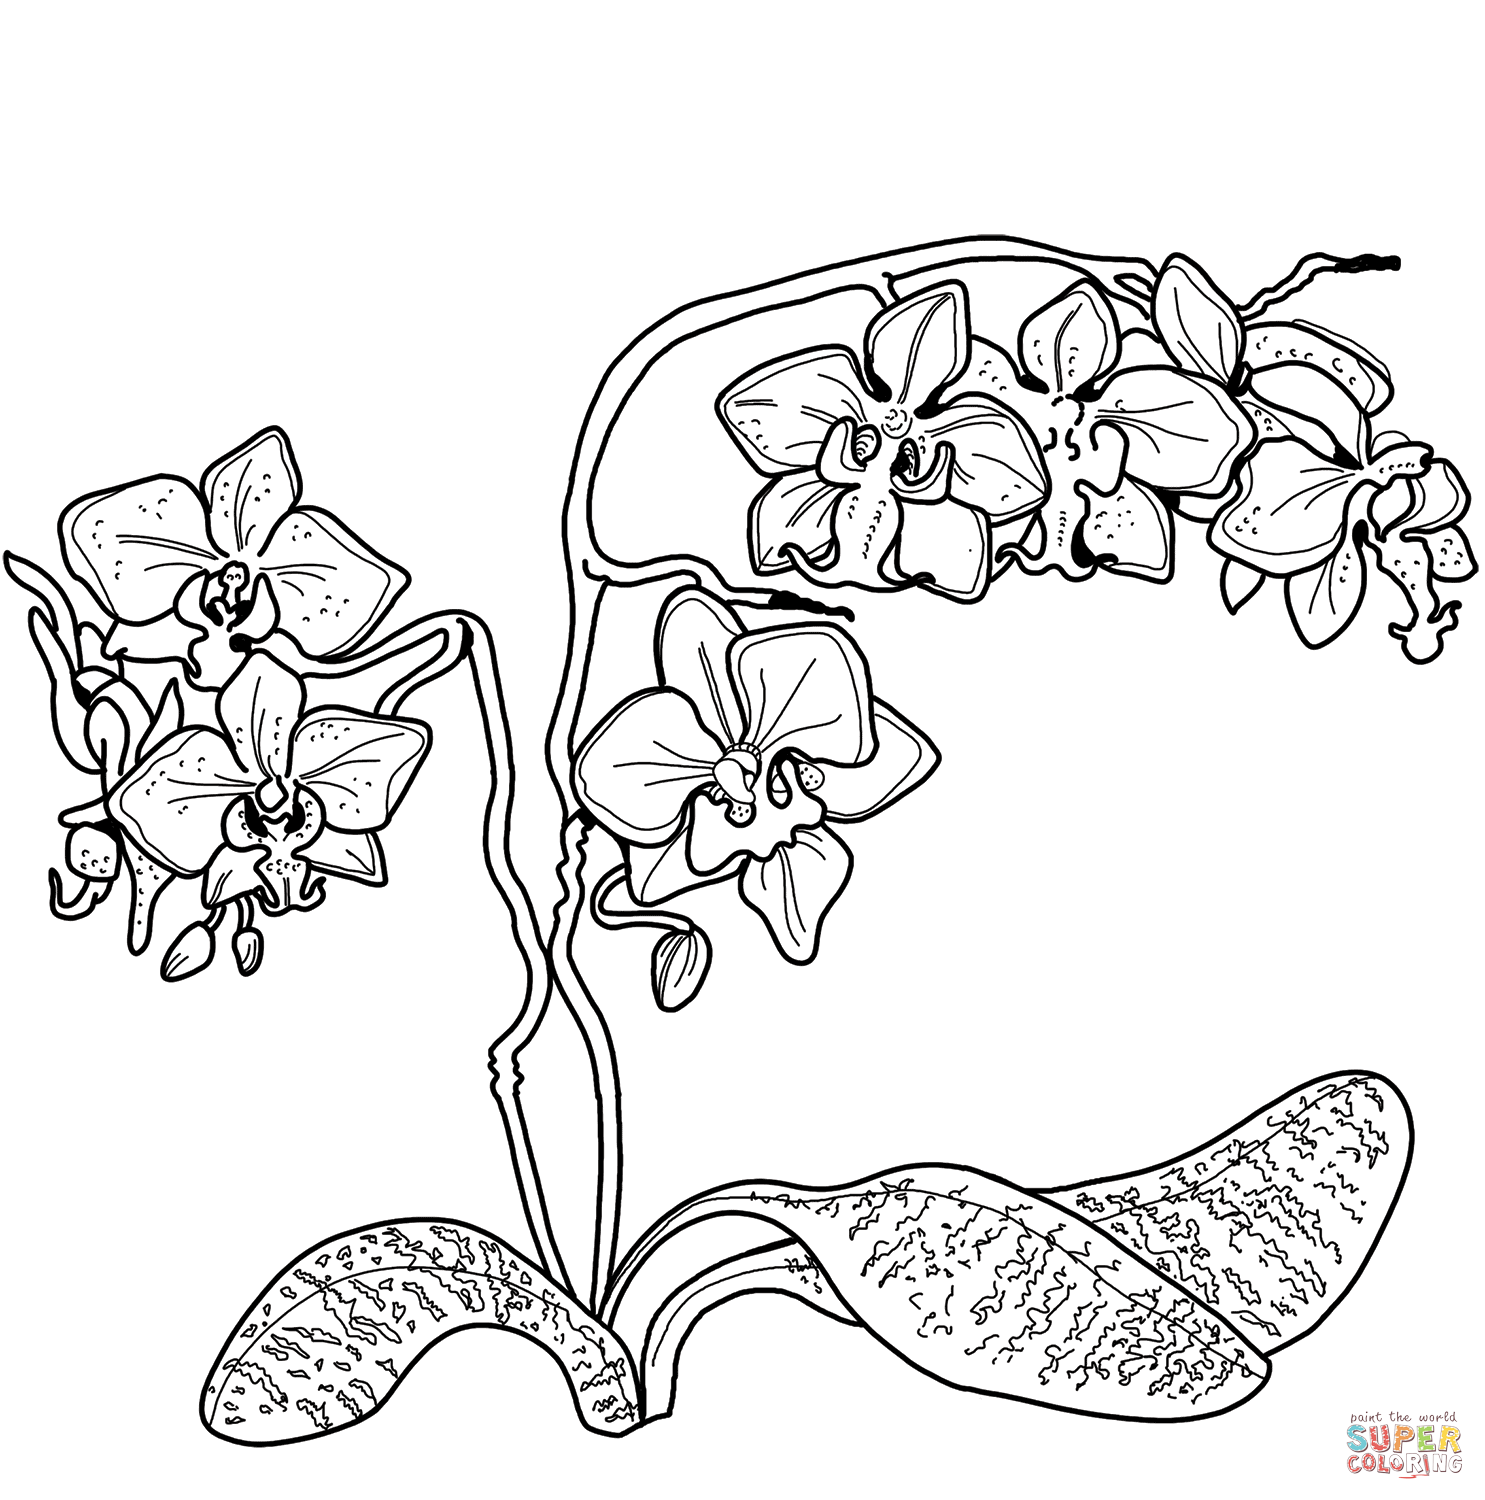 Orchid coloring page free printable coloring pages coloring pages free printable coloring printable coloring pages